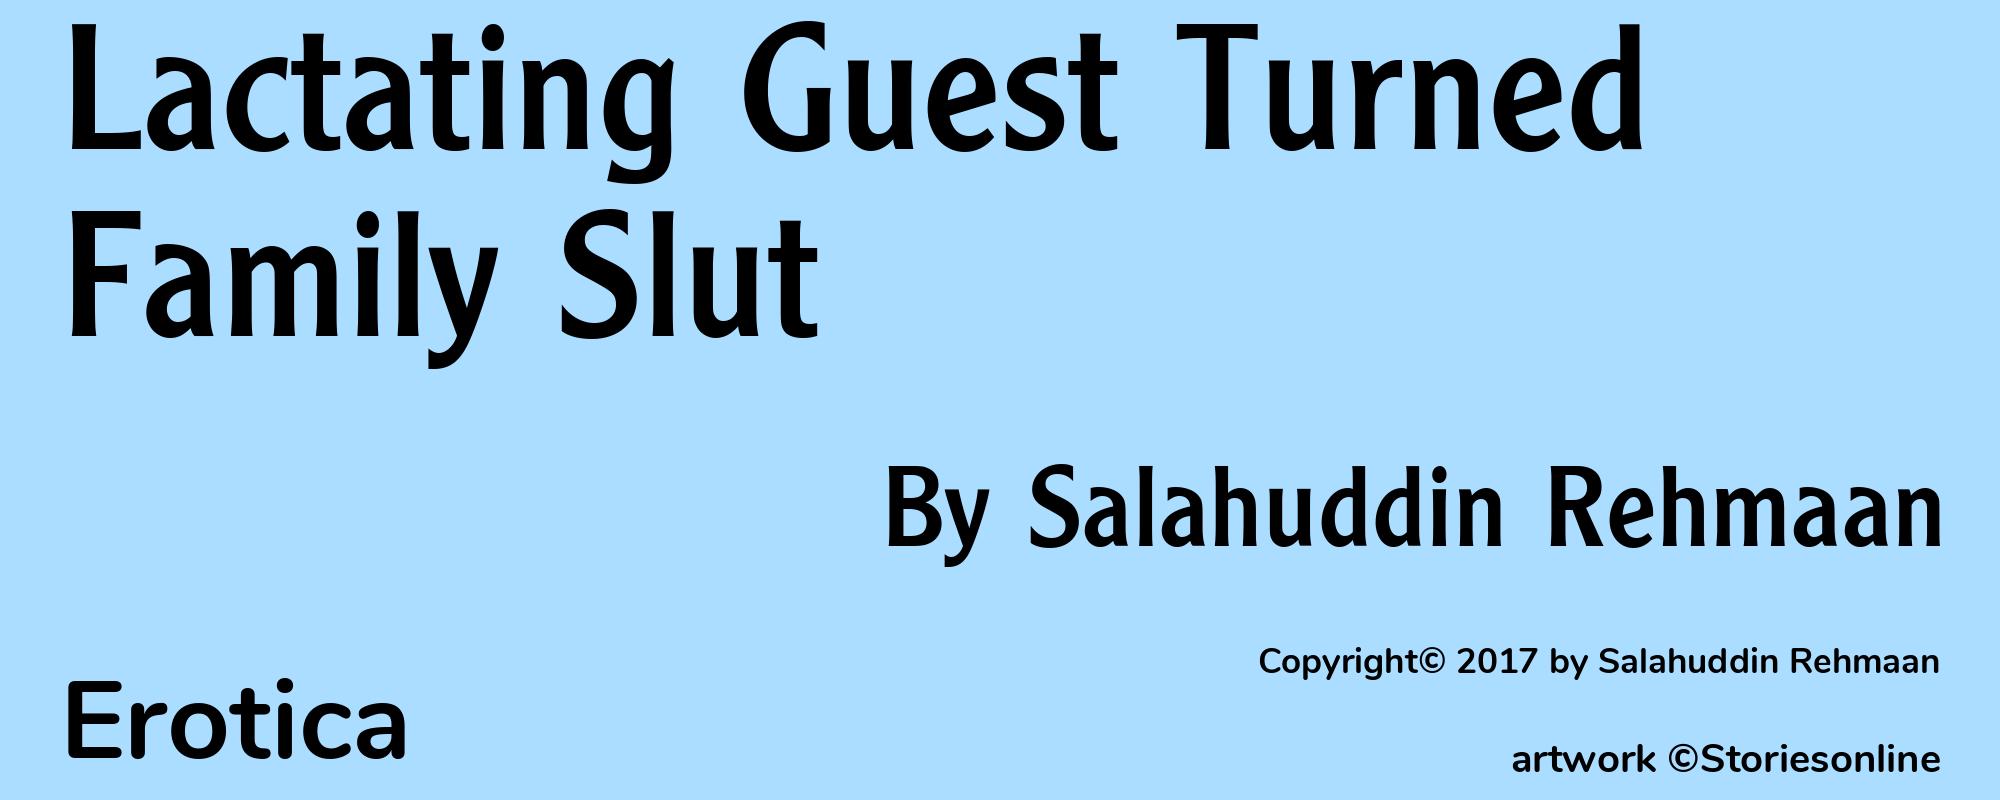 Lactating Guest Turned Family Slut - Cover